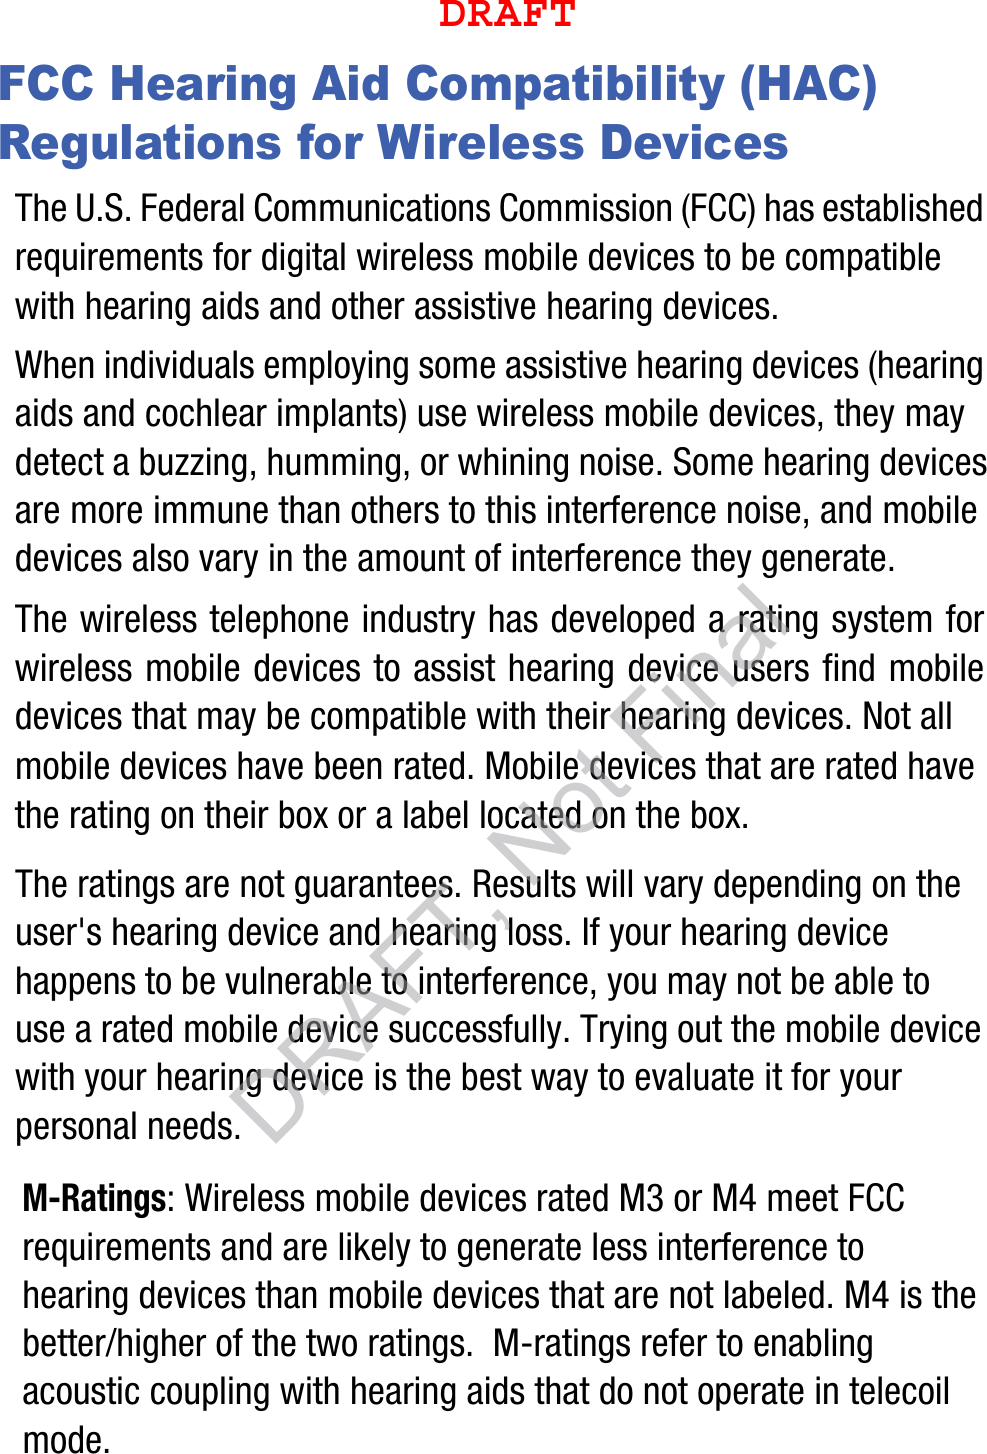 FCC Hearing Aid Compatibility (HAC) Regulations for Wireless DevicesThe U.S. Federal Communications Commission (FCC) has established requirements for digital wireless mobile devices to be compatible with hearing aids and other assistive hearing devices.When individuals employing some assistive hearing devices (hearing aids and cochlear implants) use wireless mobile devices, they may detect a buzzing, humming, or whining noise. Some hearing devices are more immune than others to this interference noise, and mobile devices also vary in the amount of interference they generate.The wireless telephone industry has developed a rating system for wireless mobile devices to assist hearing device users find mobile devices that may be compatible with their hearing devices. Not all mobile devices have been rated. Mobile devices that are rated have the rating on their box or a label located on the box.The ratings are not guarantees. Results will vary depending on the user&apos;s hearing device and hearing loss. If your hearing device happens to be vulnerable to interference, you may not be able to use a rated mobile device successfully. Trying out the mobile device with your hearing device is the best way to evaluate it for your personal needs.M-Ratings: Wireless mobile devices rated M3 or M4 meet FCC requirements and are likely to generate less interference to hearing devices than mobile devices that are not labeled. M4 is the better/higher of the two ratings.  M-ratings refer to enabling acoustic coupling with hearing aids that do not operate in telecoil mode.DRAFT, Not FinalDRAFT